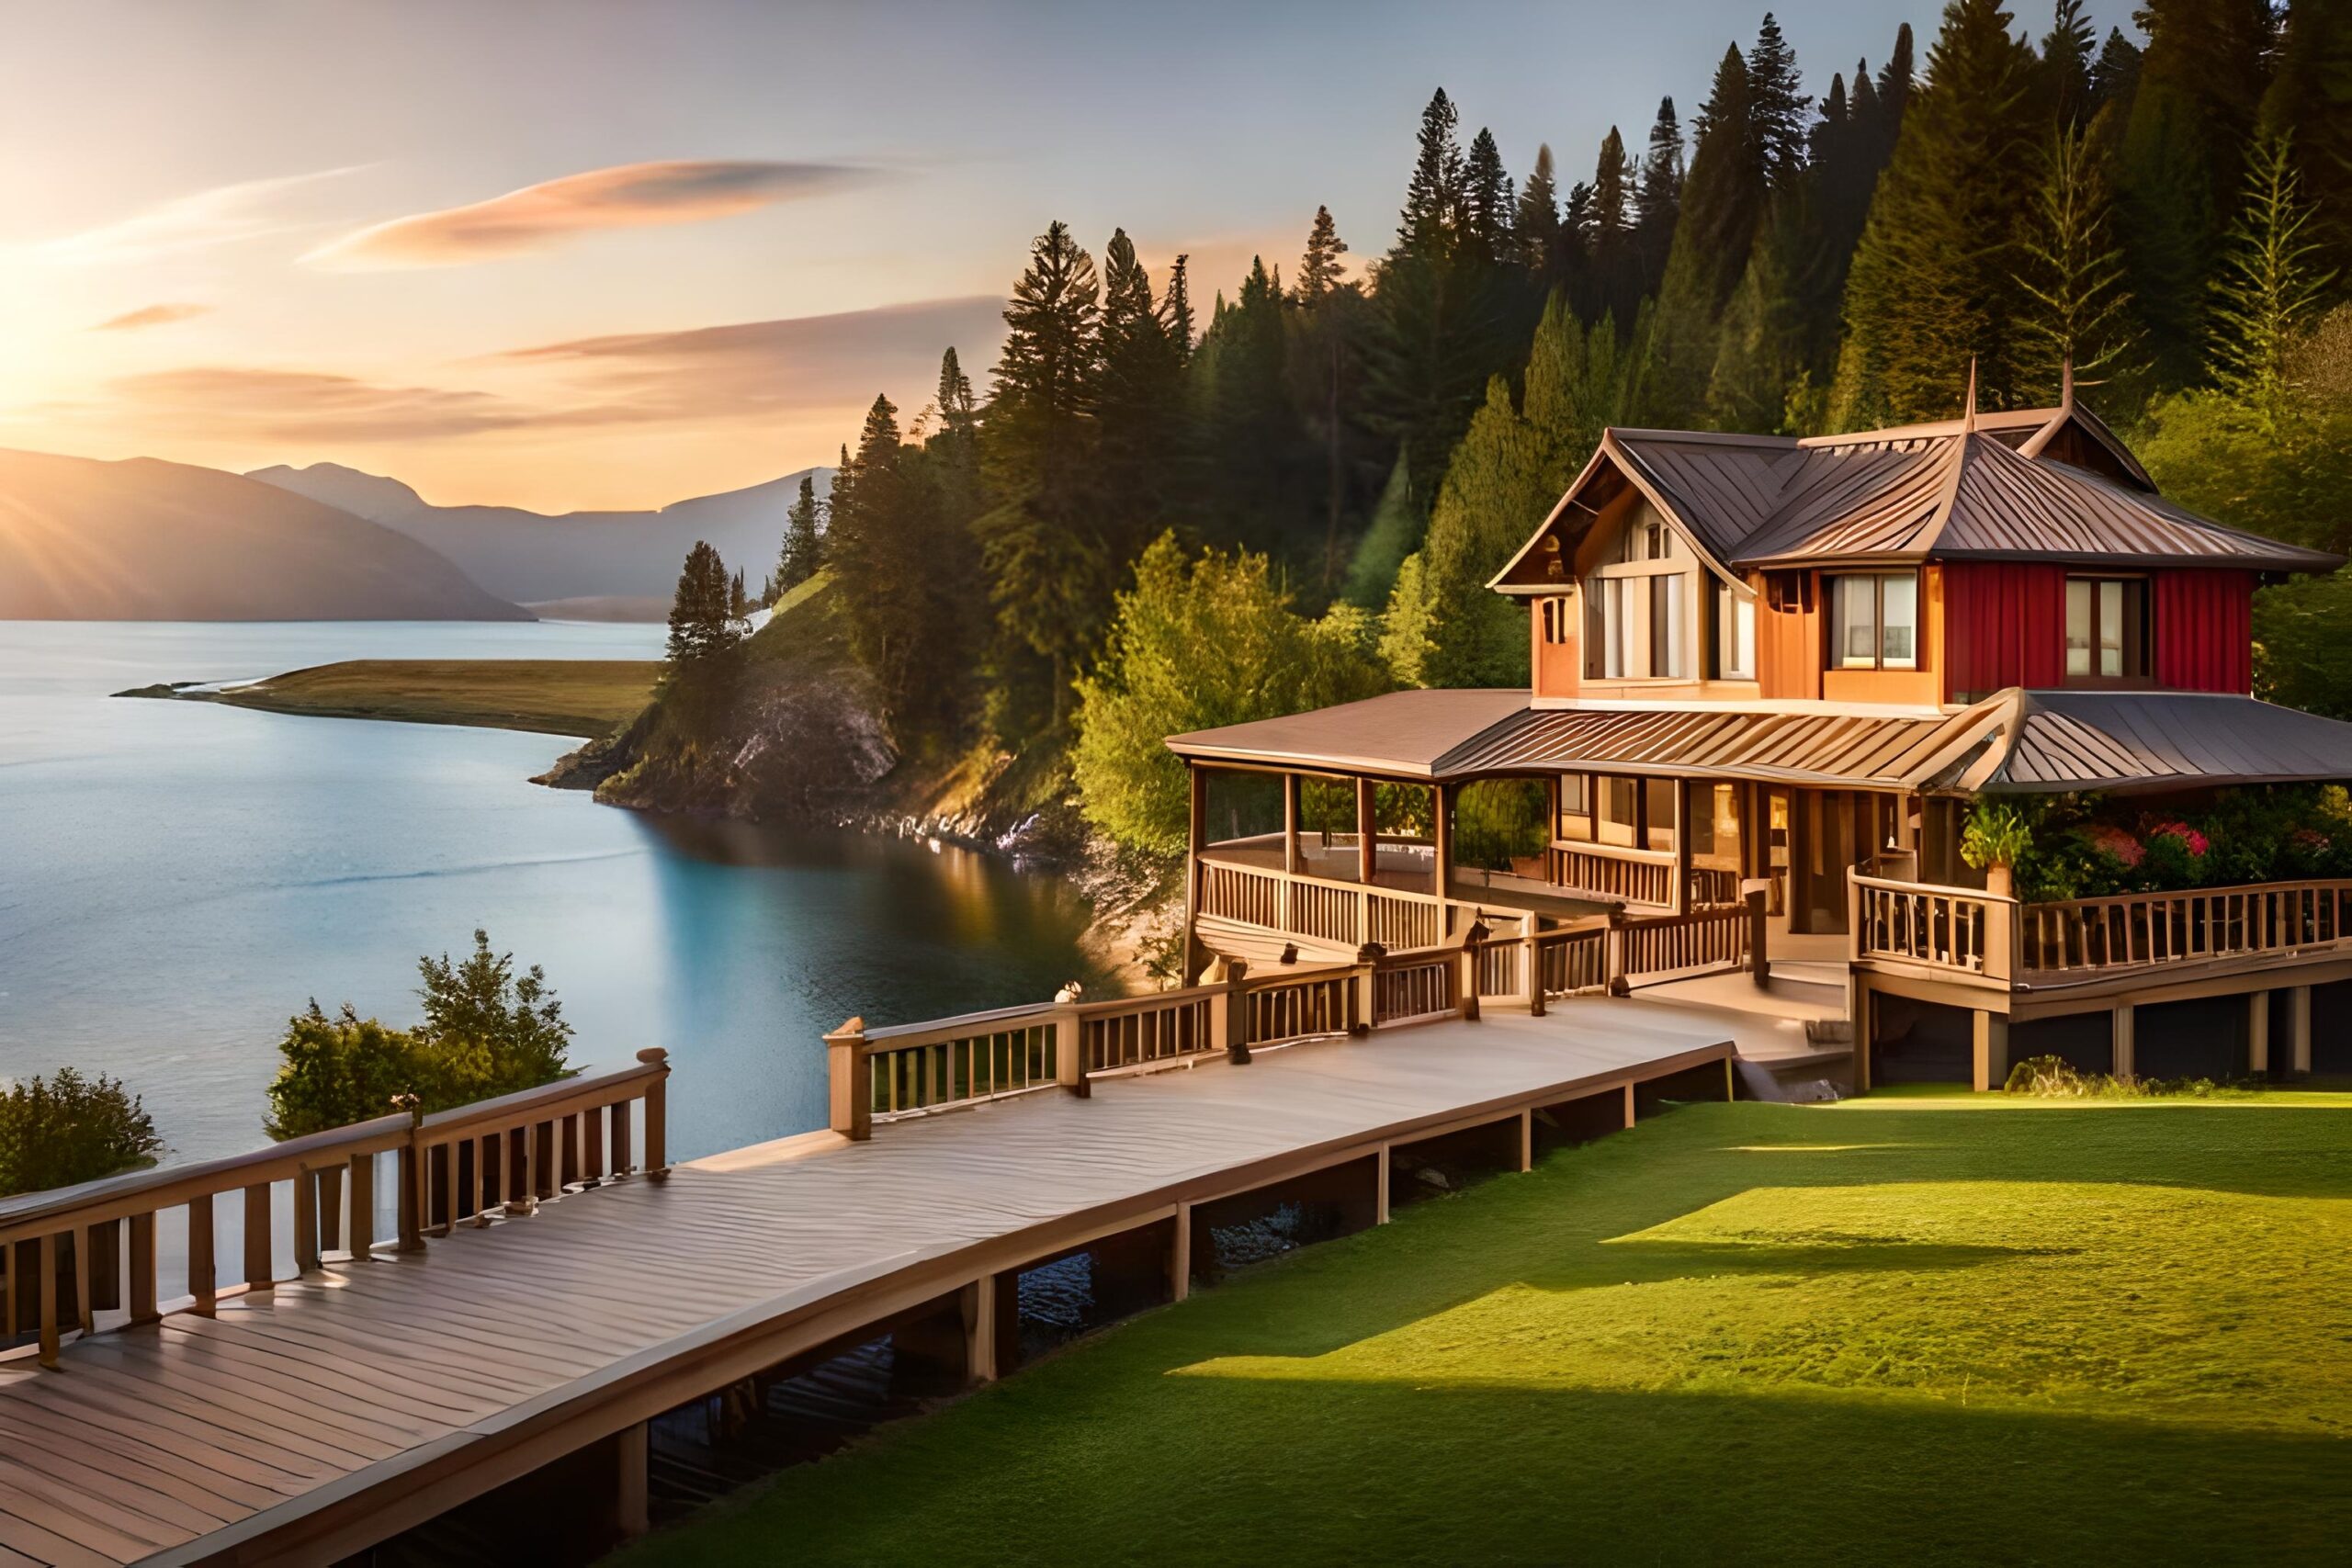 The Pros and Cons of Owning a Vacation Home